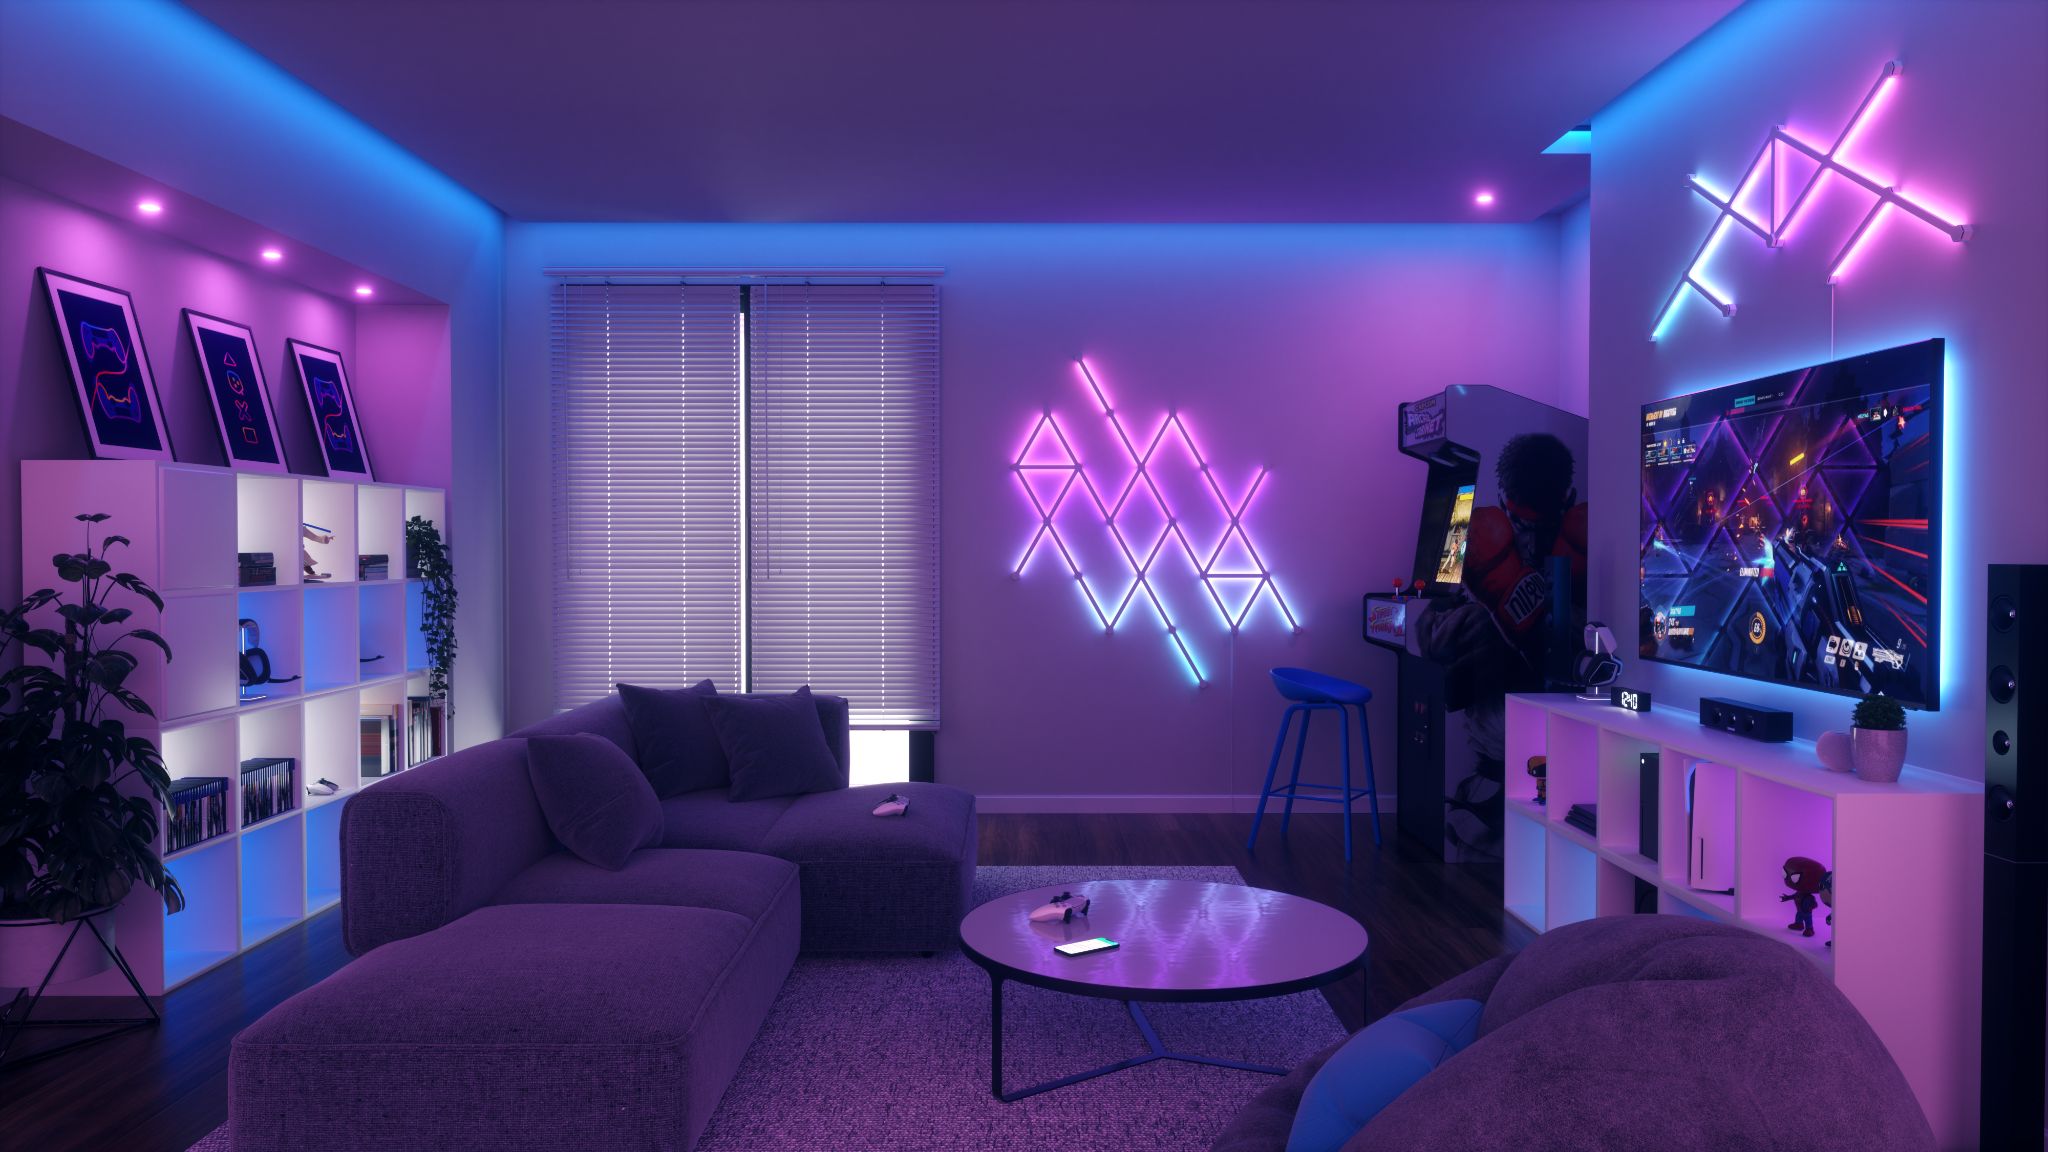 RGB light lines layout mounted onto two separate walls in a gaming room.